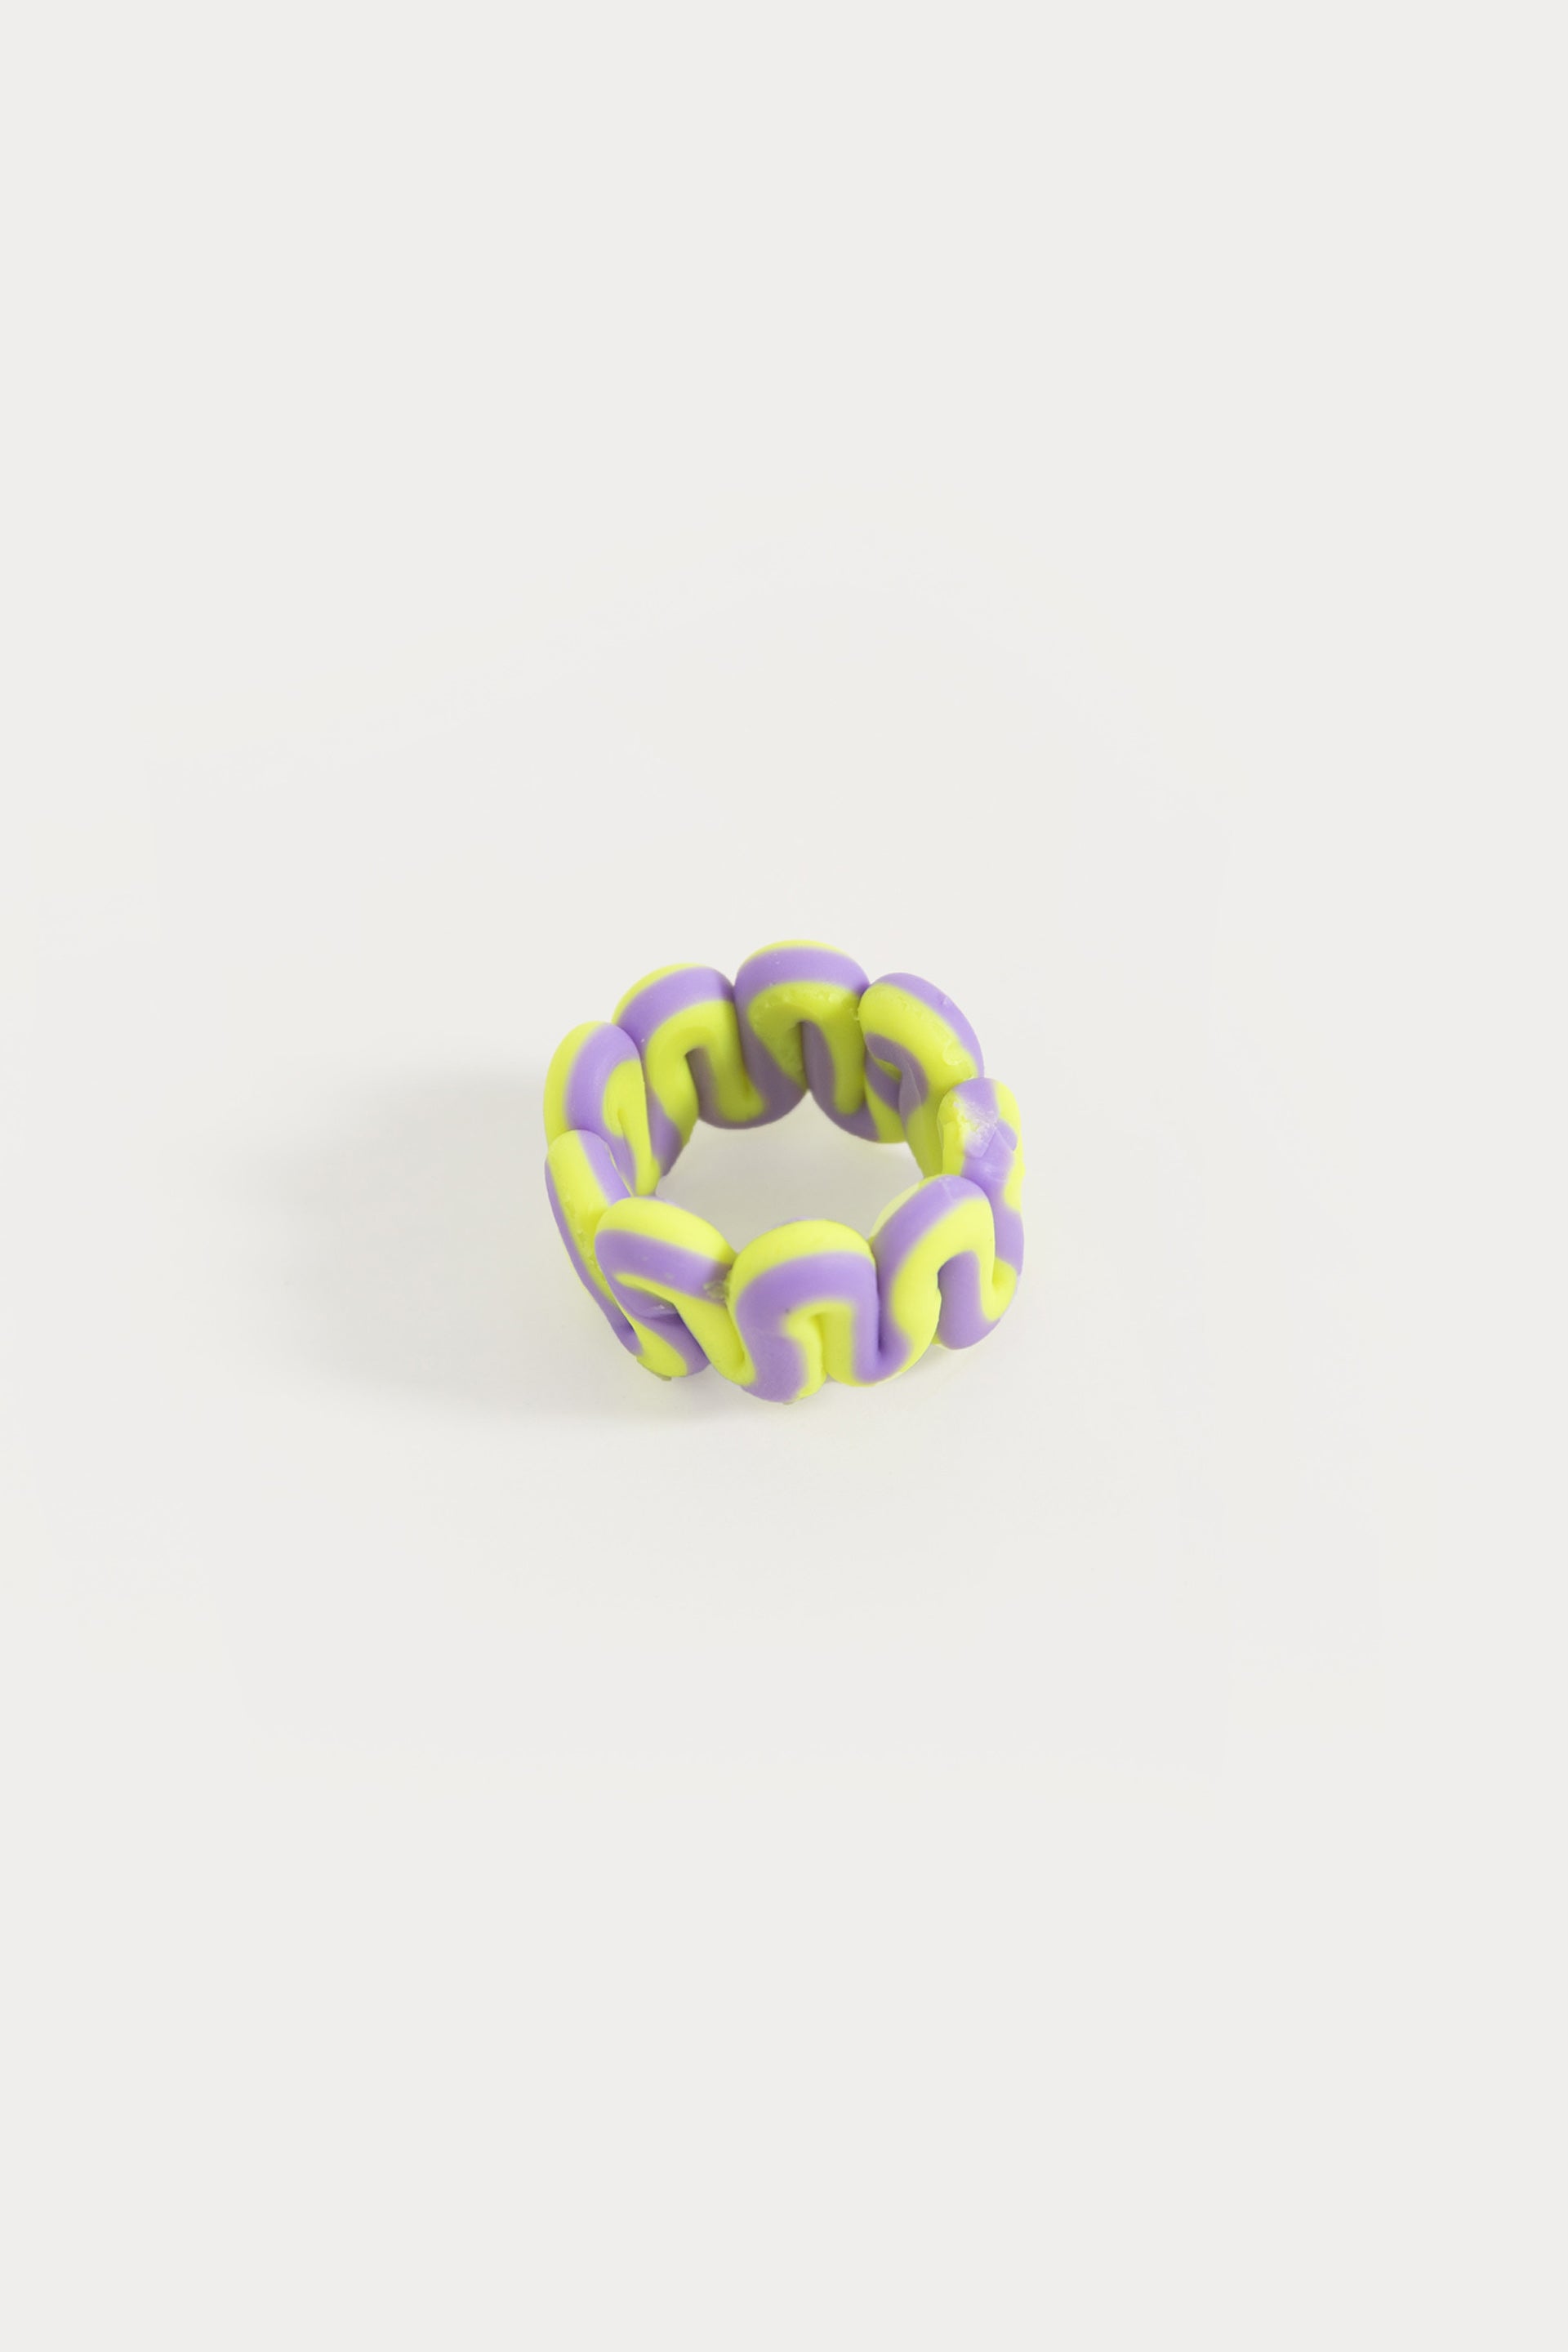 Set of Funky Bold Rings